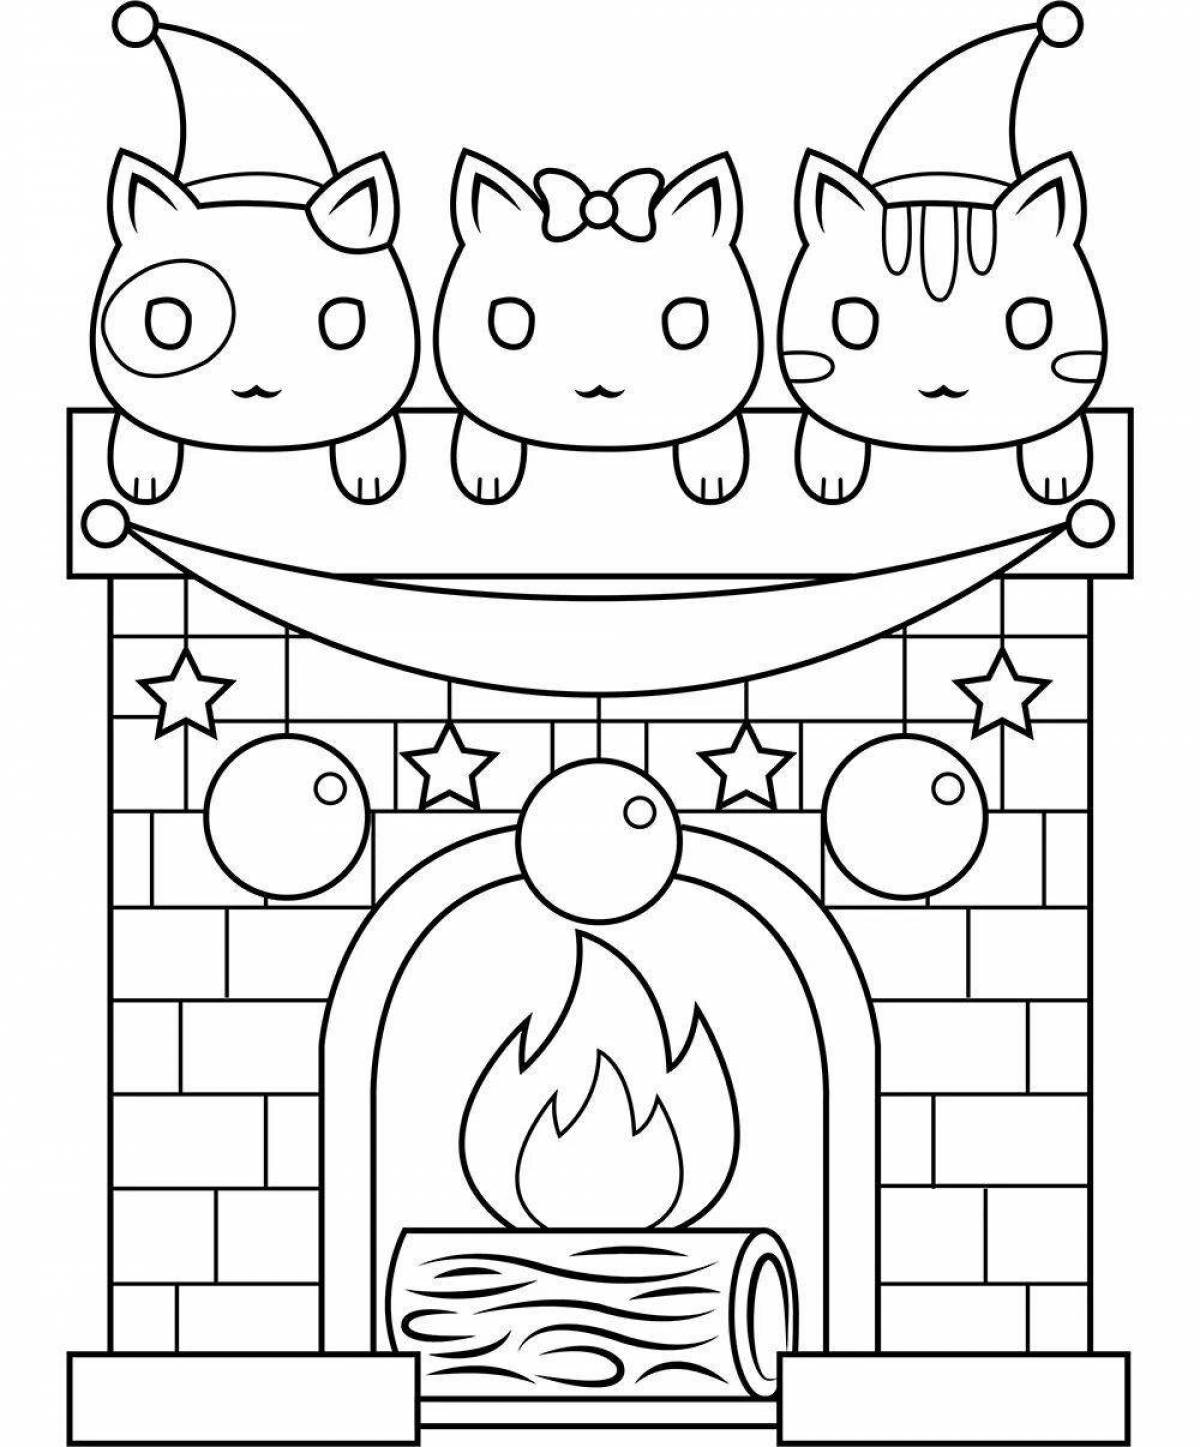 Glowing fireplace coloring book